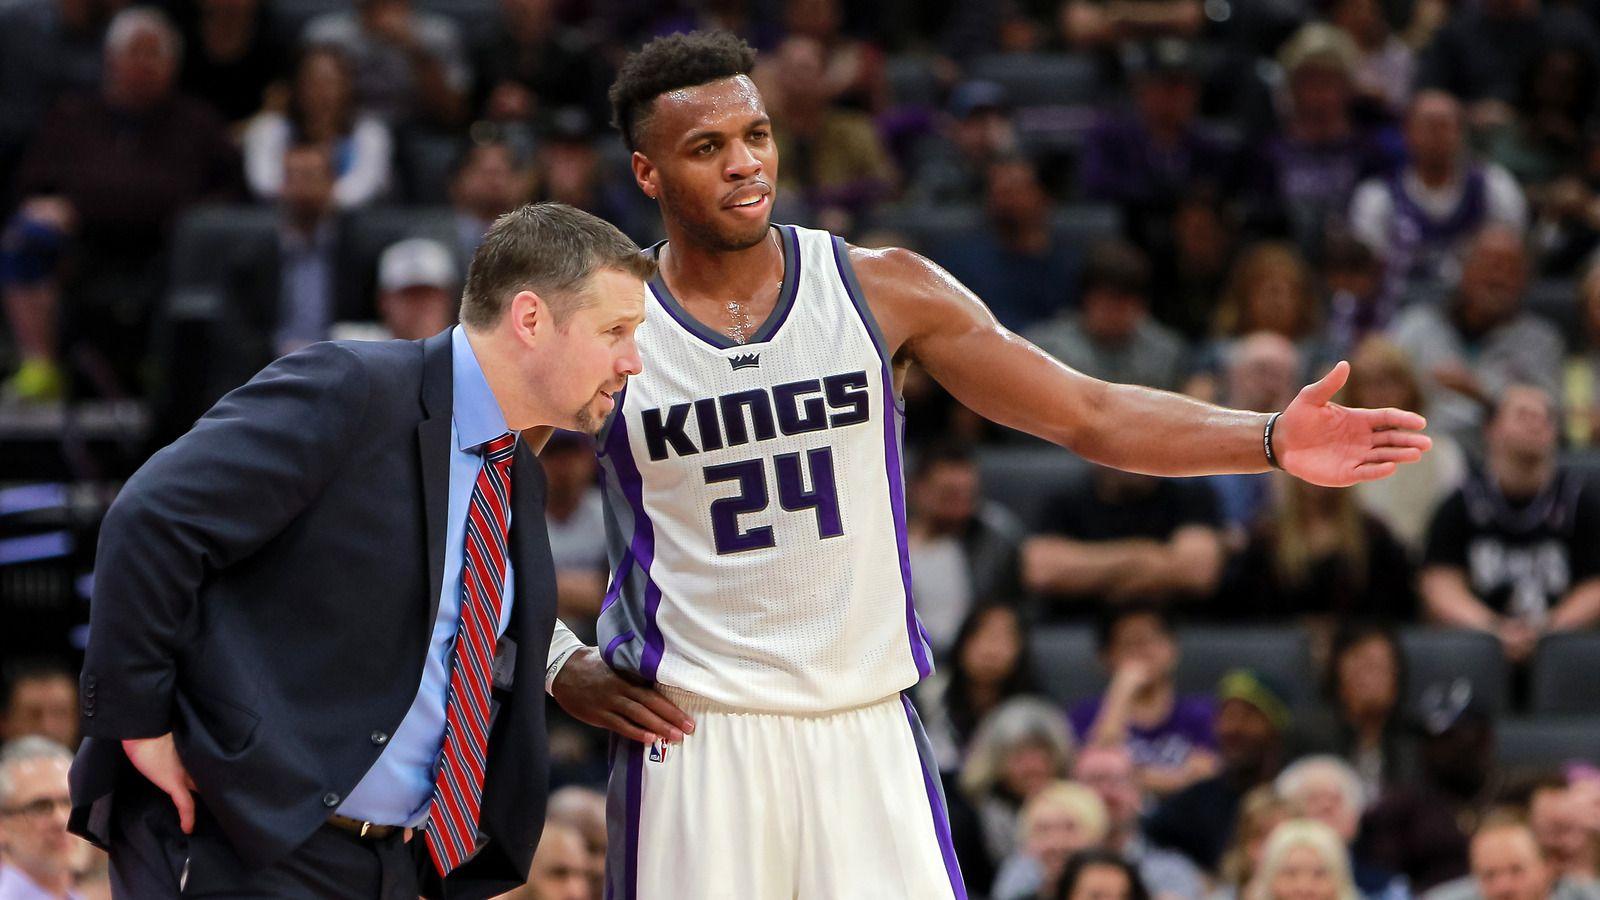 Buddy Hield breaks from Kings owner: 'I'm not Steph Curry